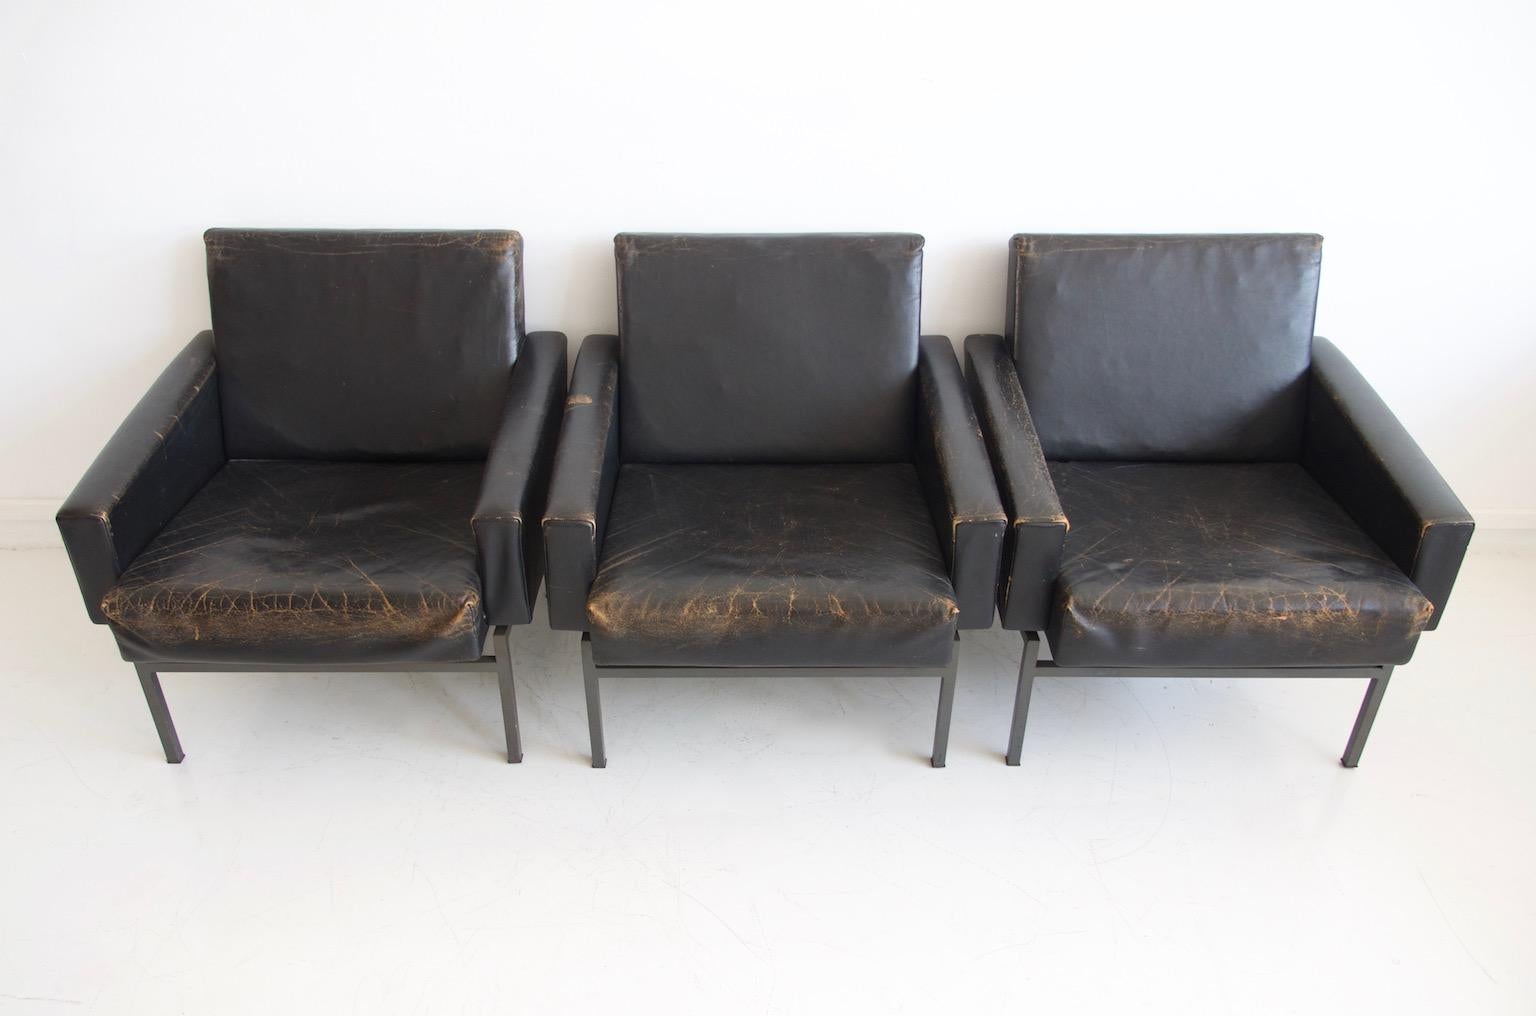 Steel Set of Three Friedrich Wilhelm Moller for COR Leather Armchairs